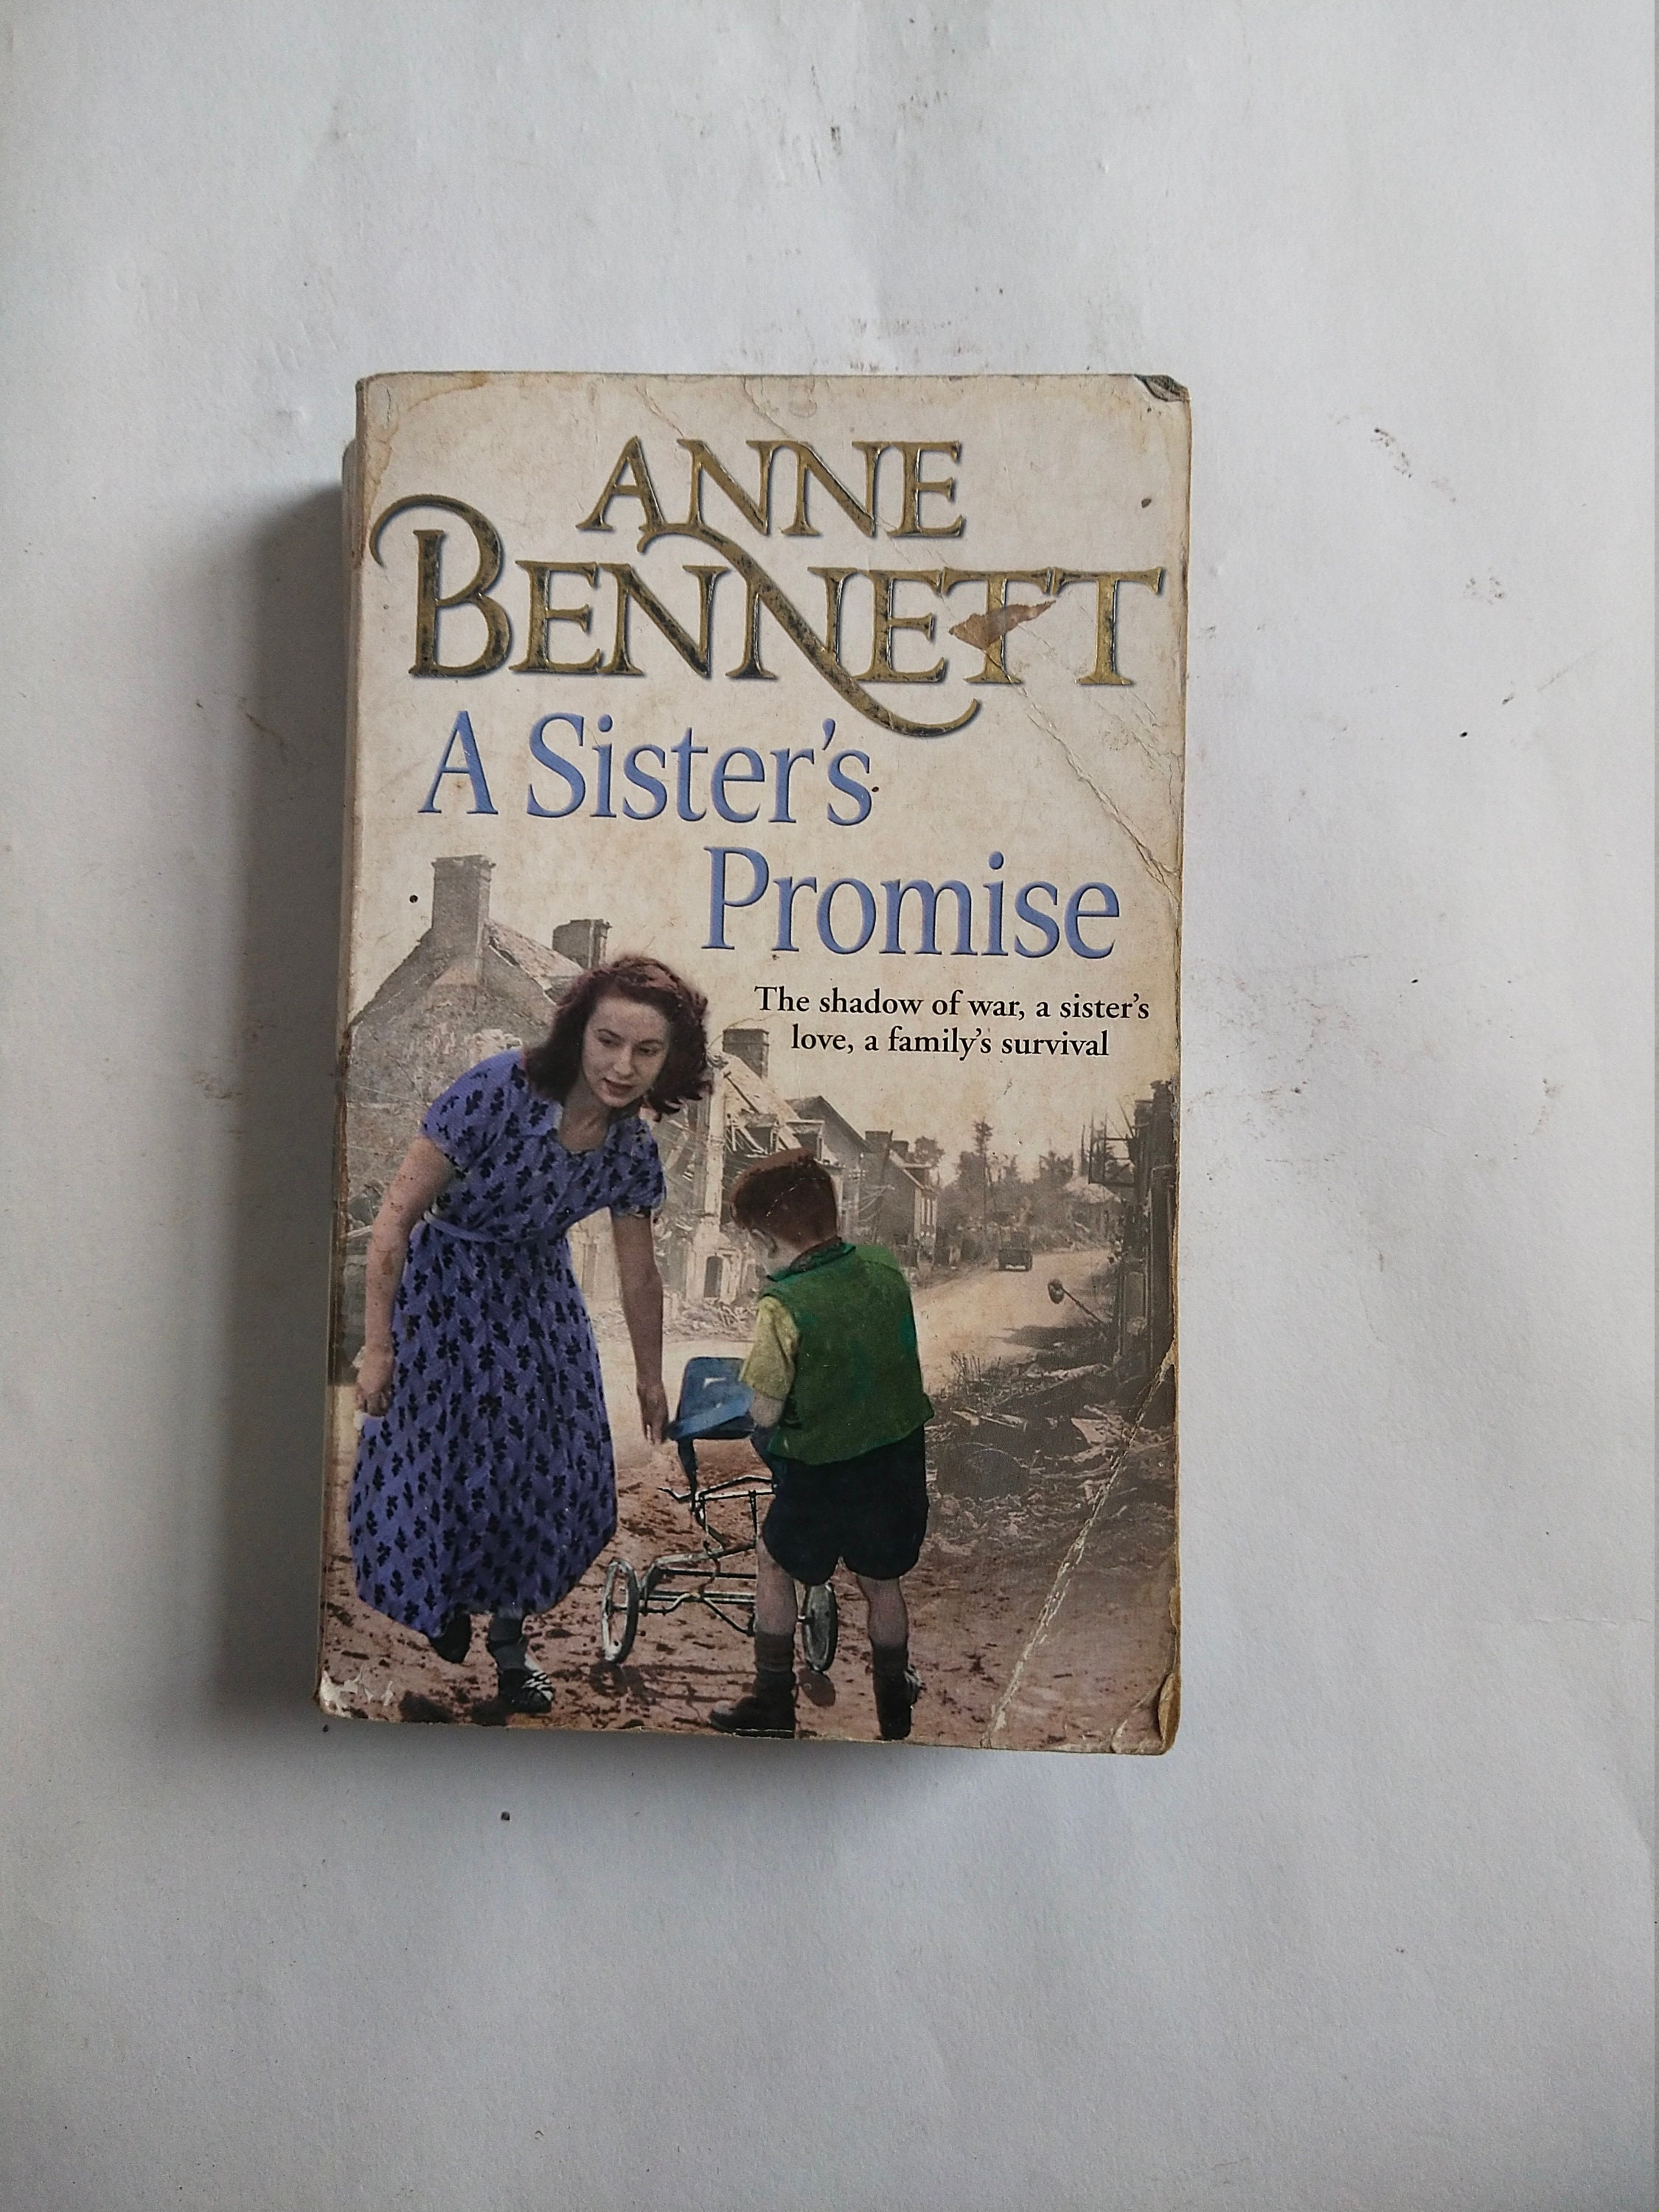 Old english book of Anne Bennett rare collectible a sisters promise 442 ...